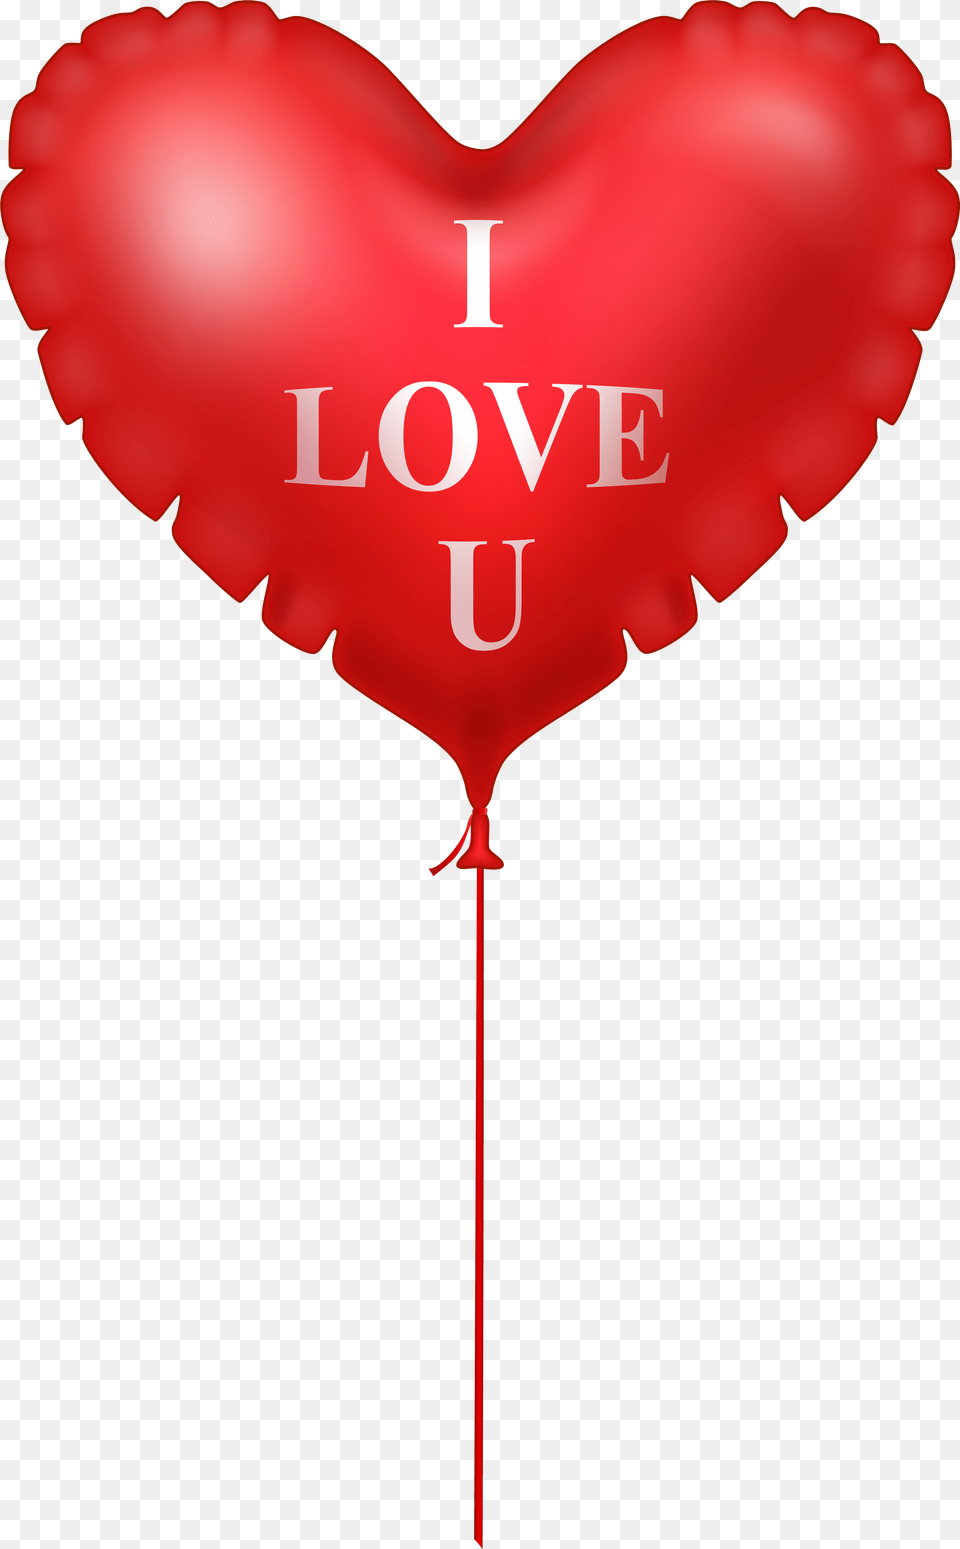 I Love You Heart Love Heart Balloon Free Png Download